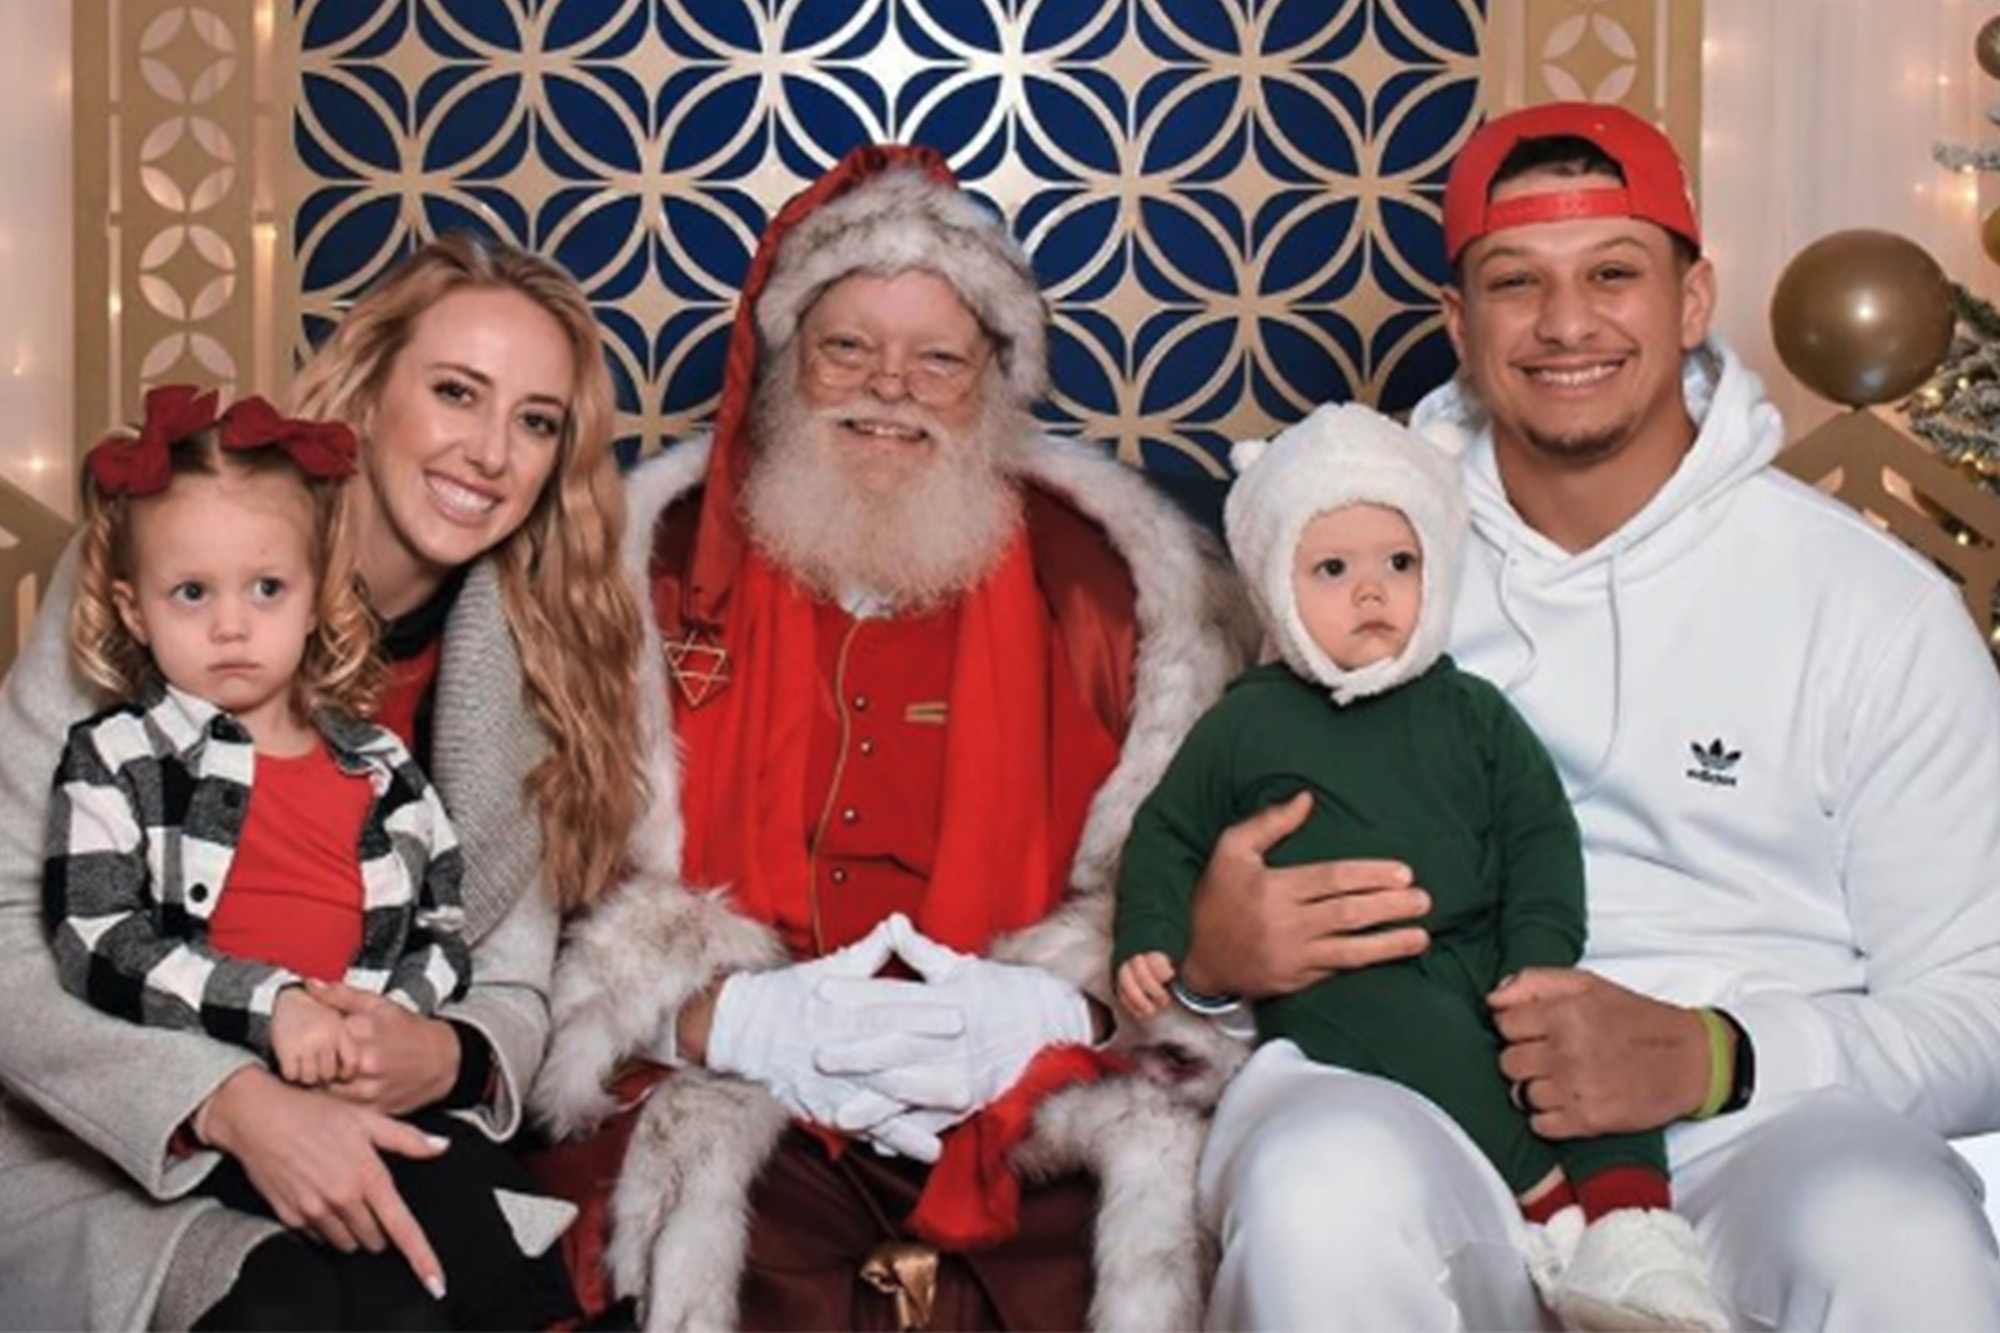 Brittany Mahomes, the wife of Chiefs QB Patrick Mahomes, posted new holiday photos on Instagram.